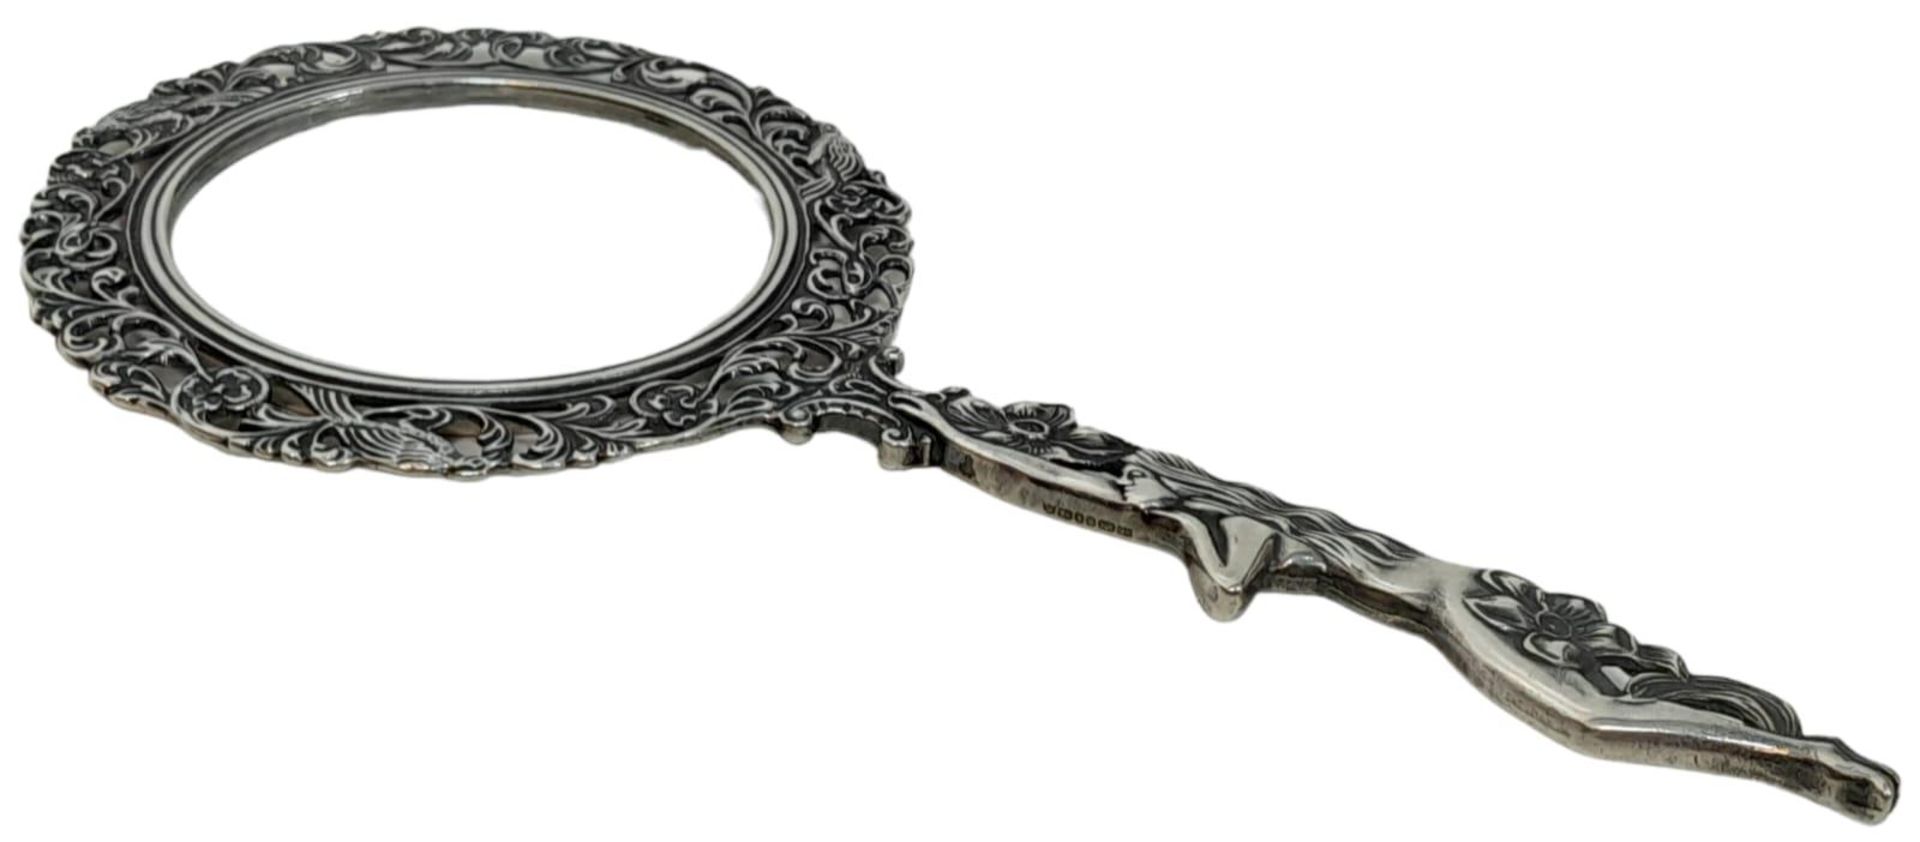 An Art Nouveau sterling silver vanity mirror, length: 16 cm, weight: 45 g. - Image 3 of 4